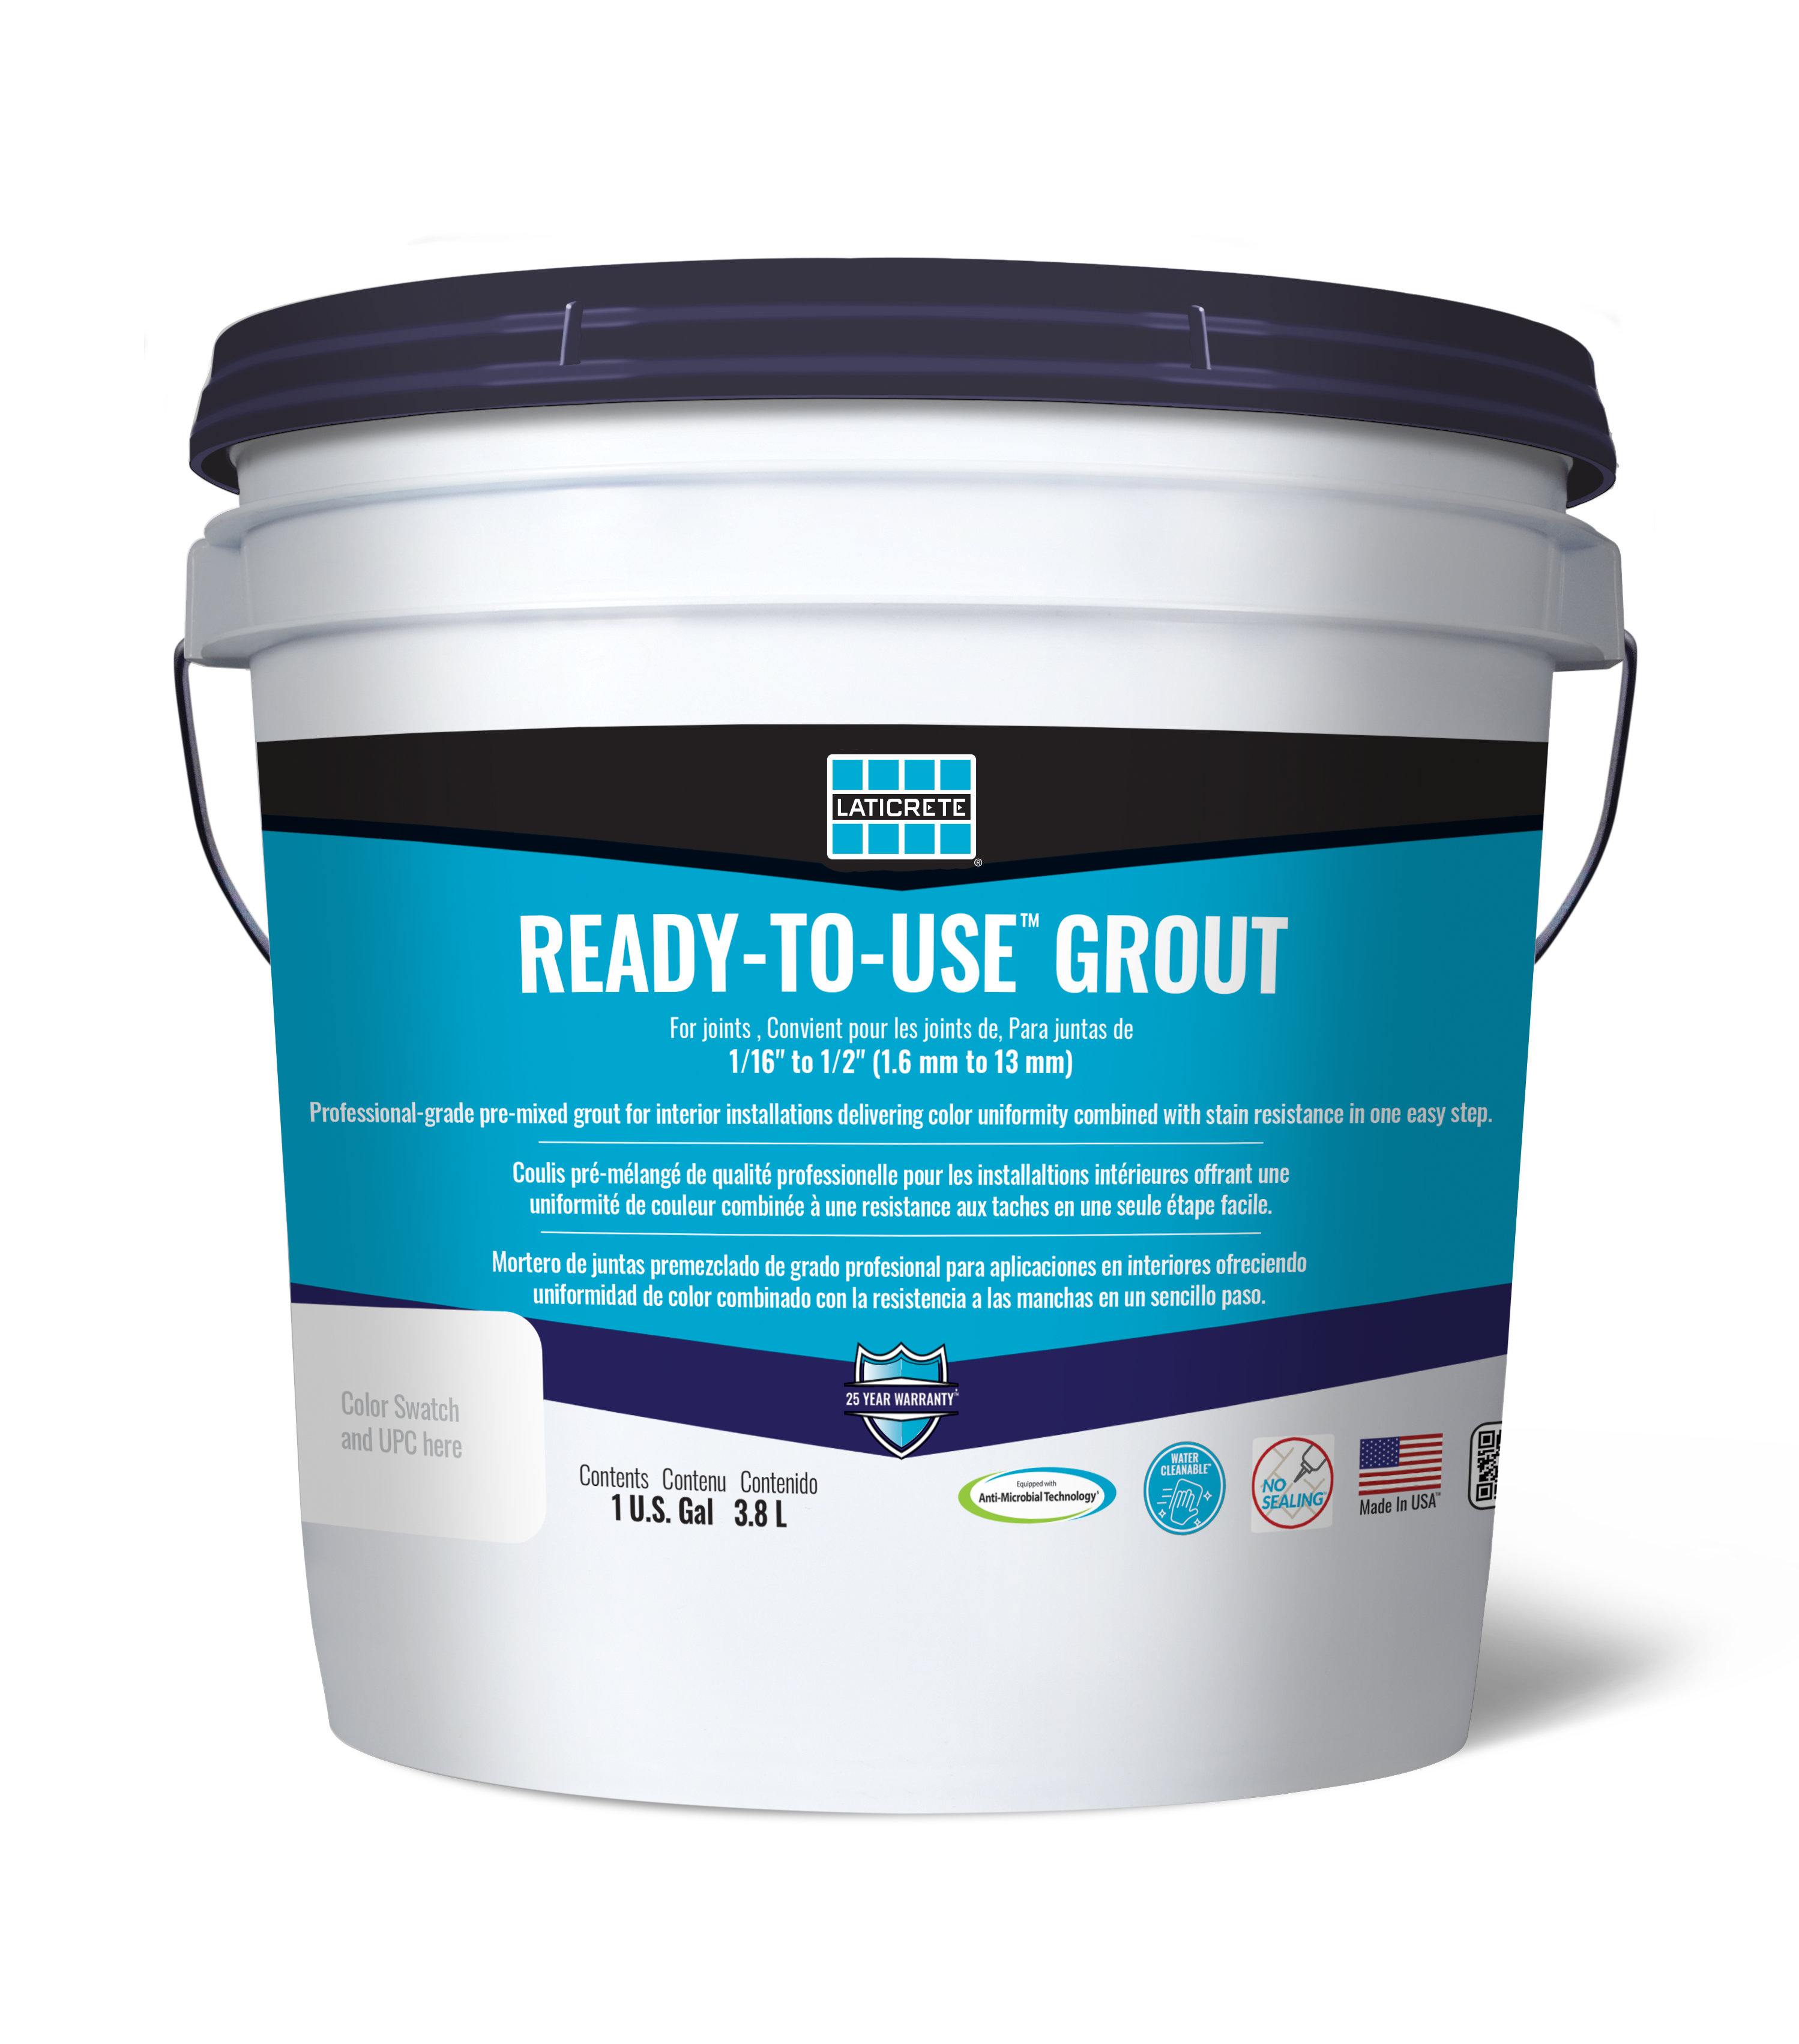 READY-TO-USE Pre-Mixed Grout